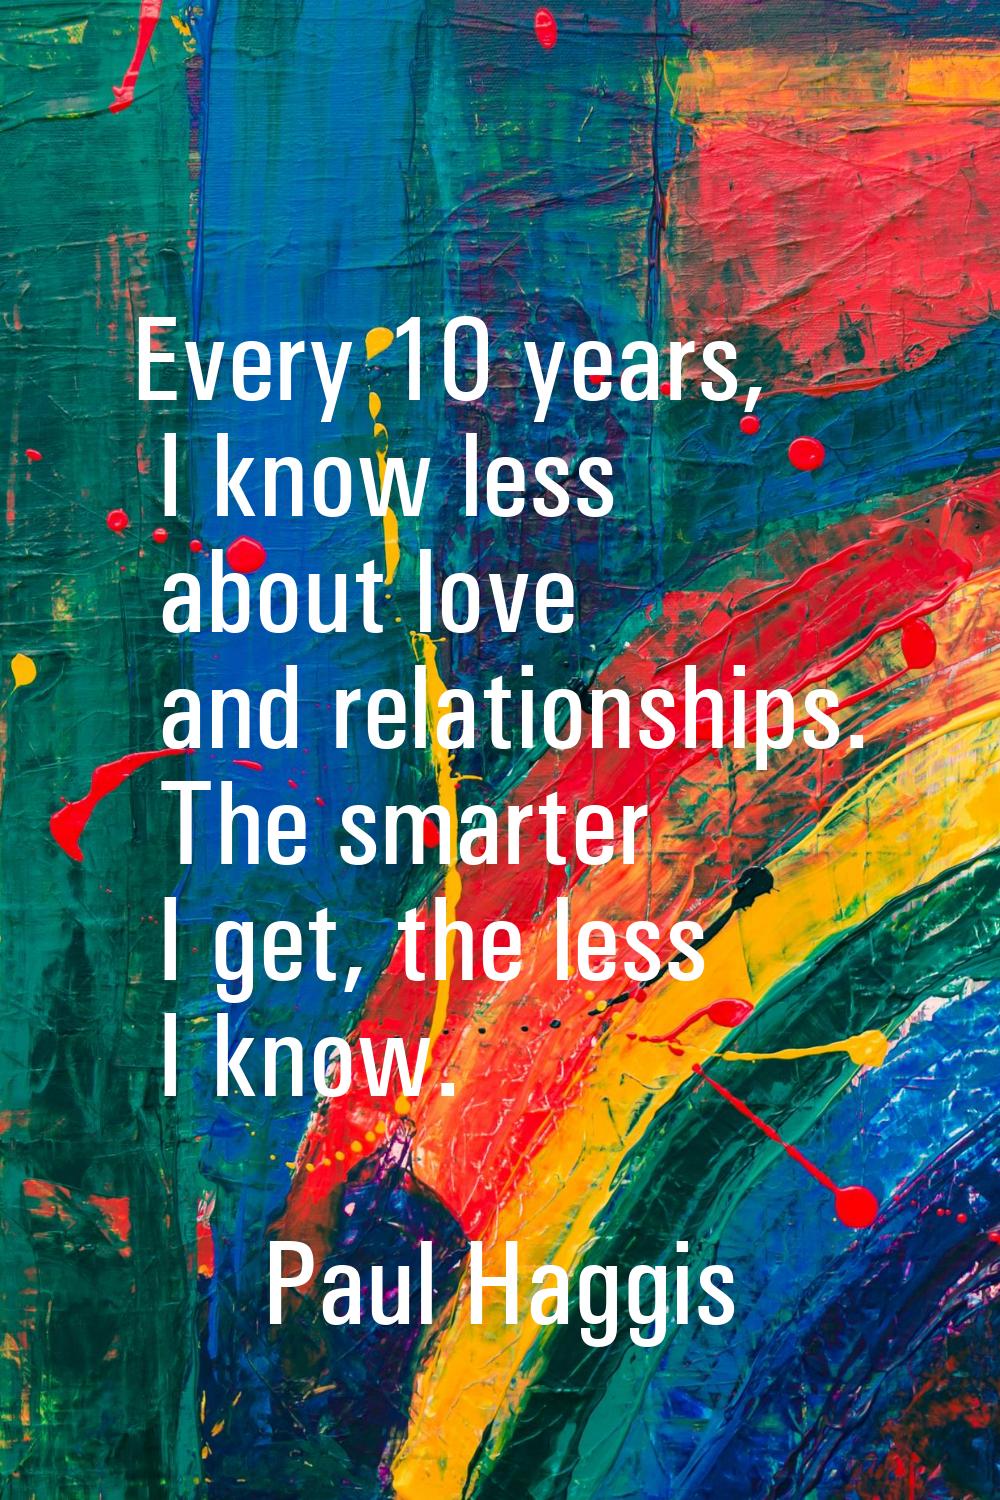 Every 10 years, I know less about love and relationships. The smarter I get, the less I know.